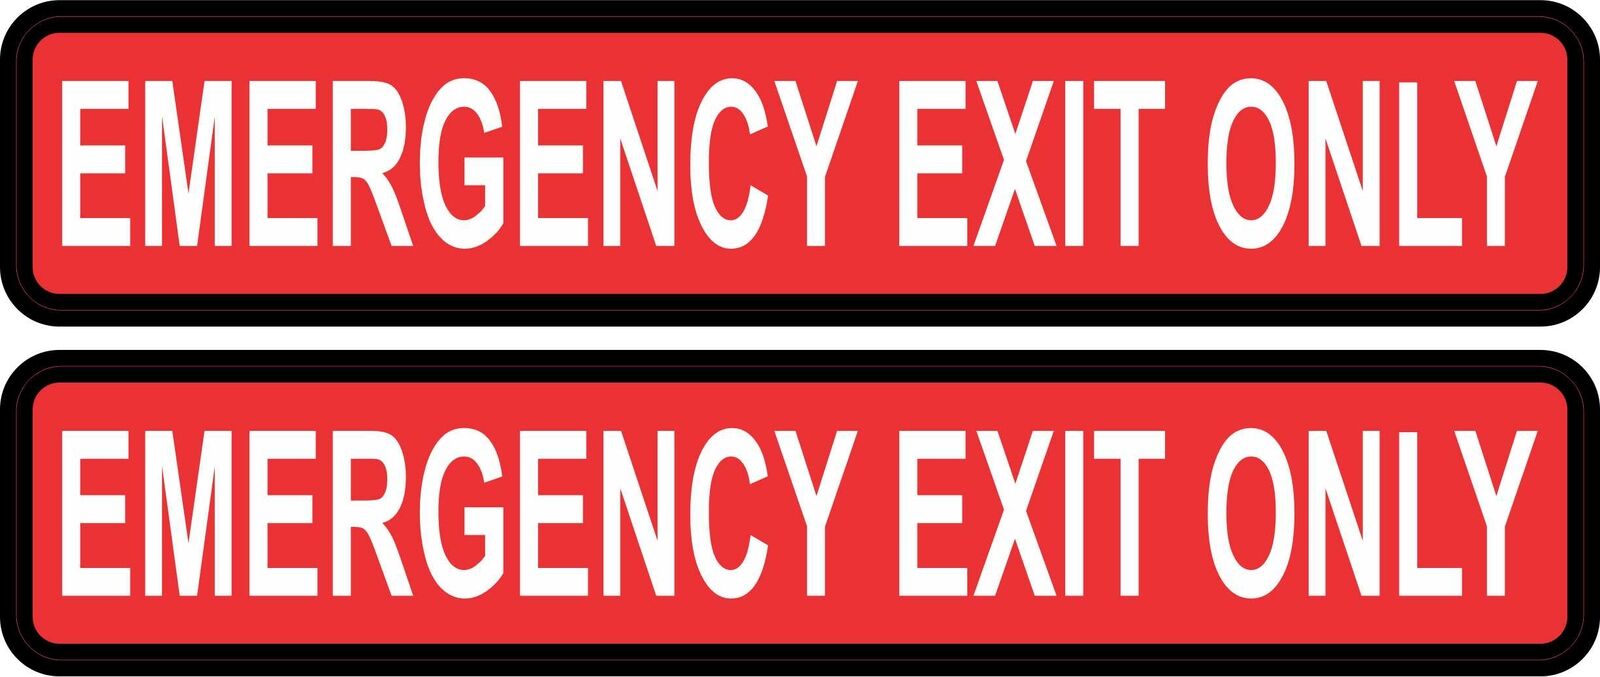 8in x 1.5in Emergency Exit Only Vinyl Stickers Business Safety Sign Decals